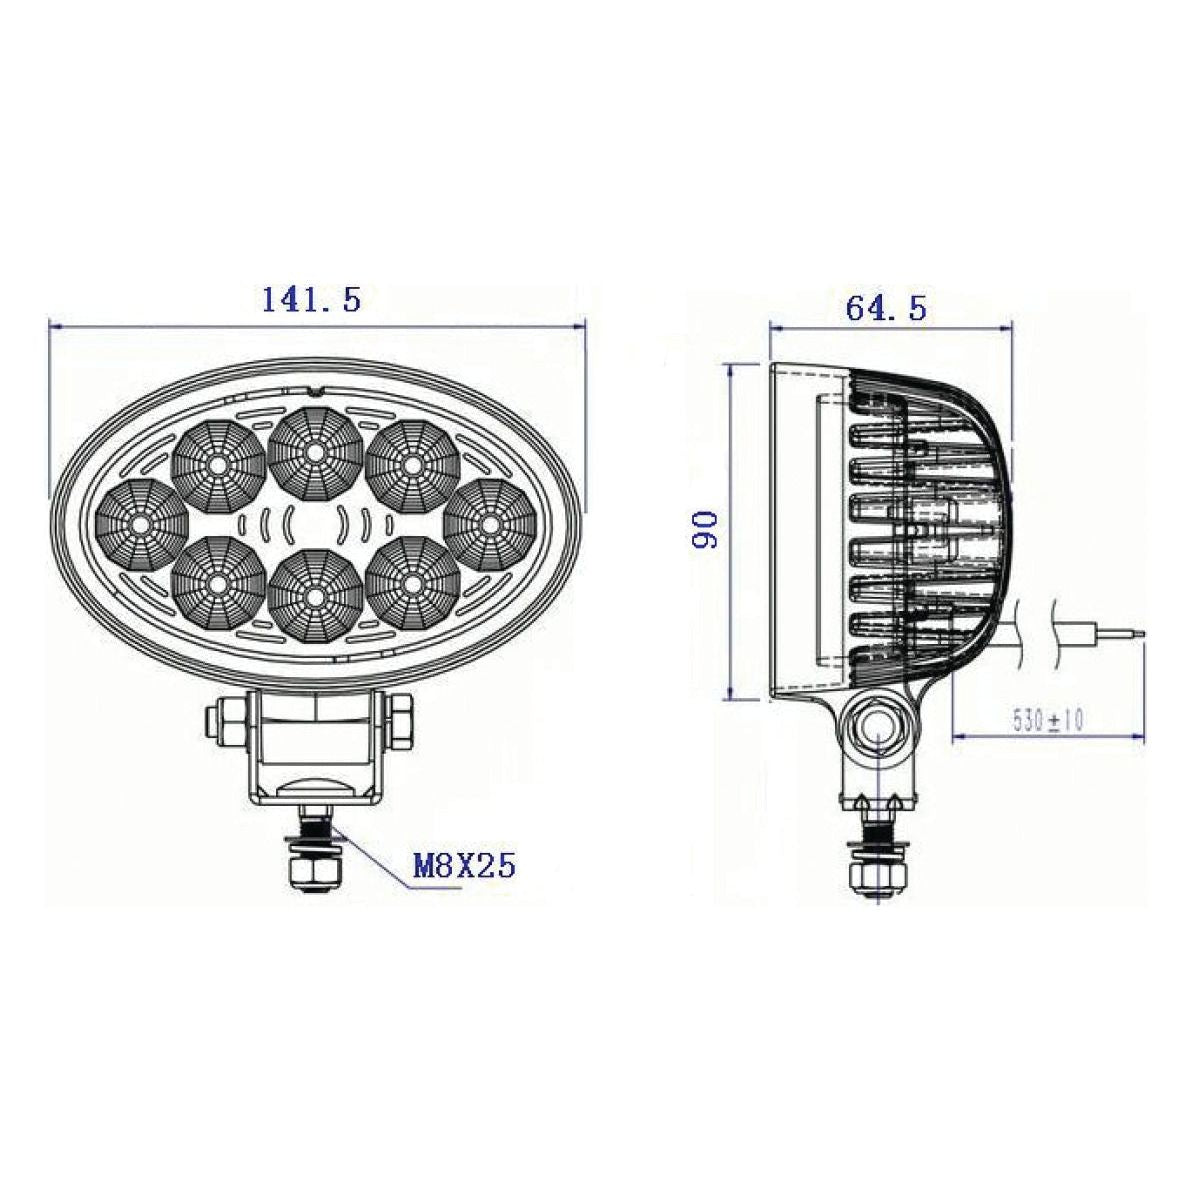 LED Work Light, Interference: Class 1, 3000 Lumens Raw, 10-30V ()
 - S.112527 - Farming Parts